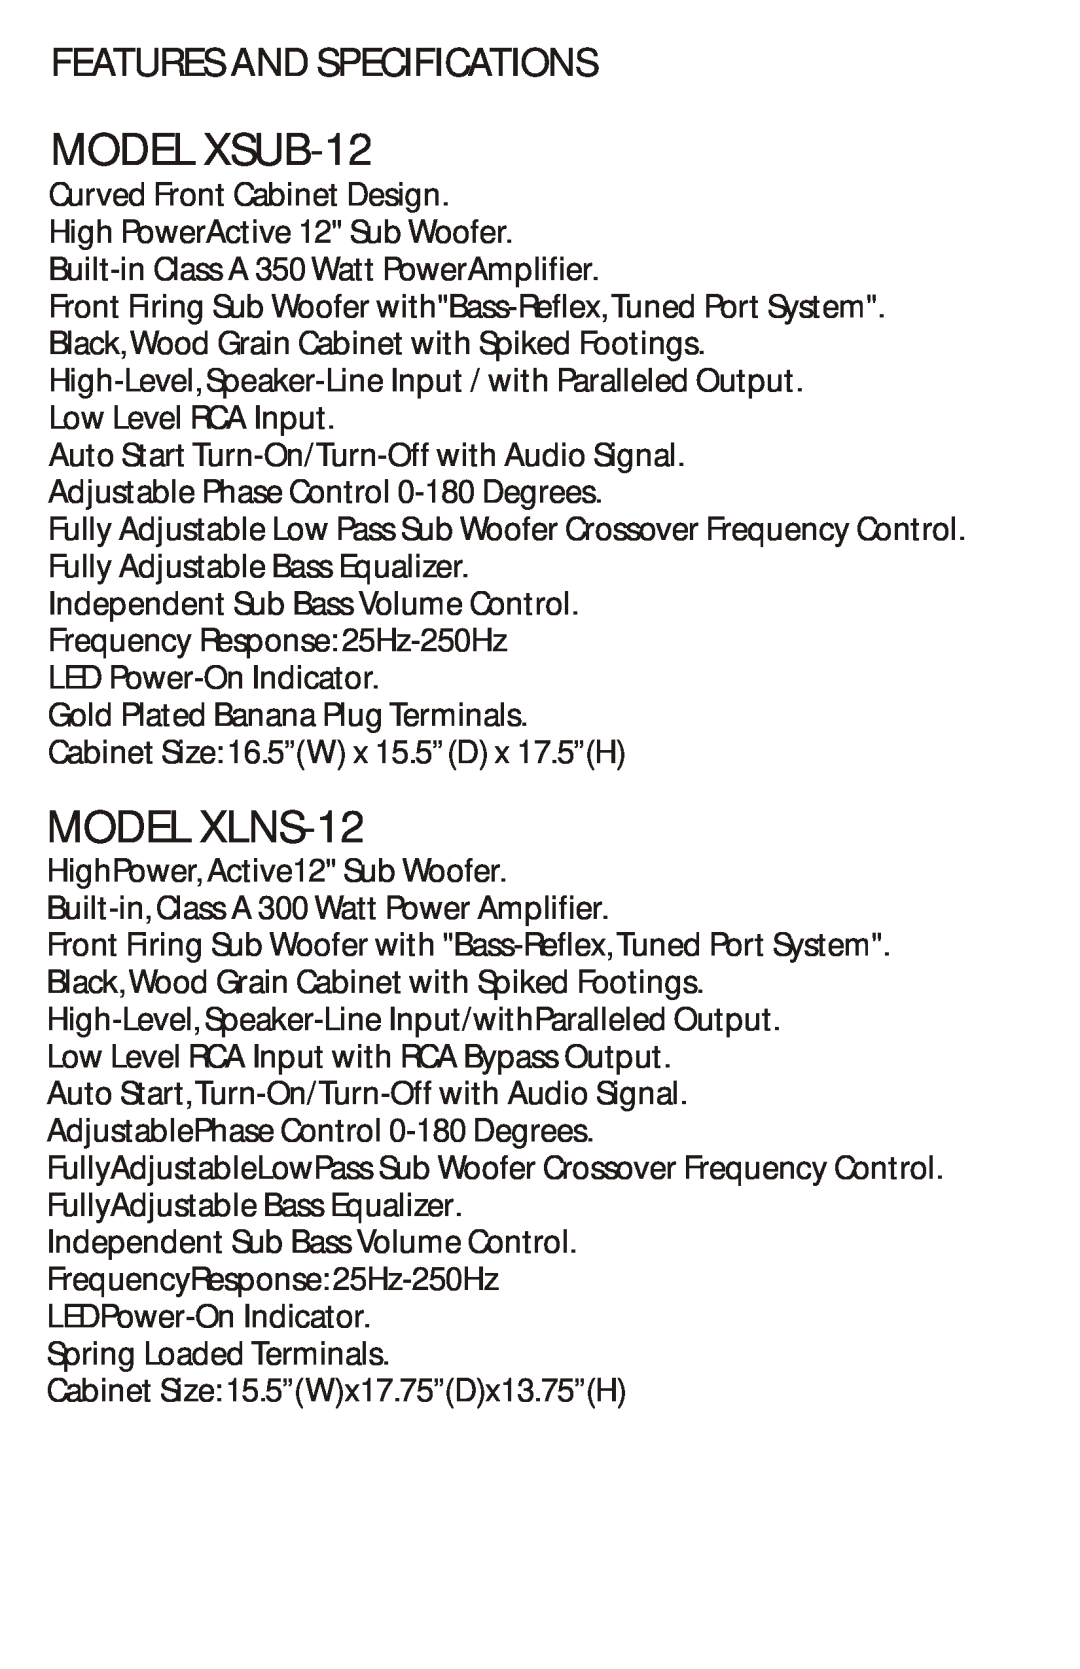 Cadence manual MODEL XSUB-12, MODEL XLNS-12, Features And Specifications 